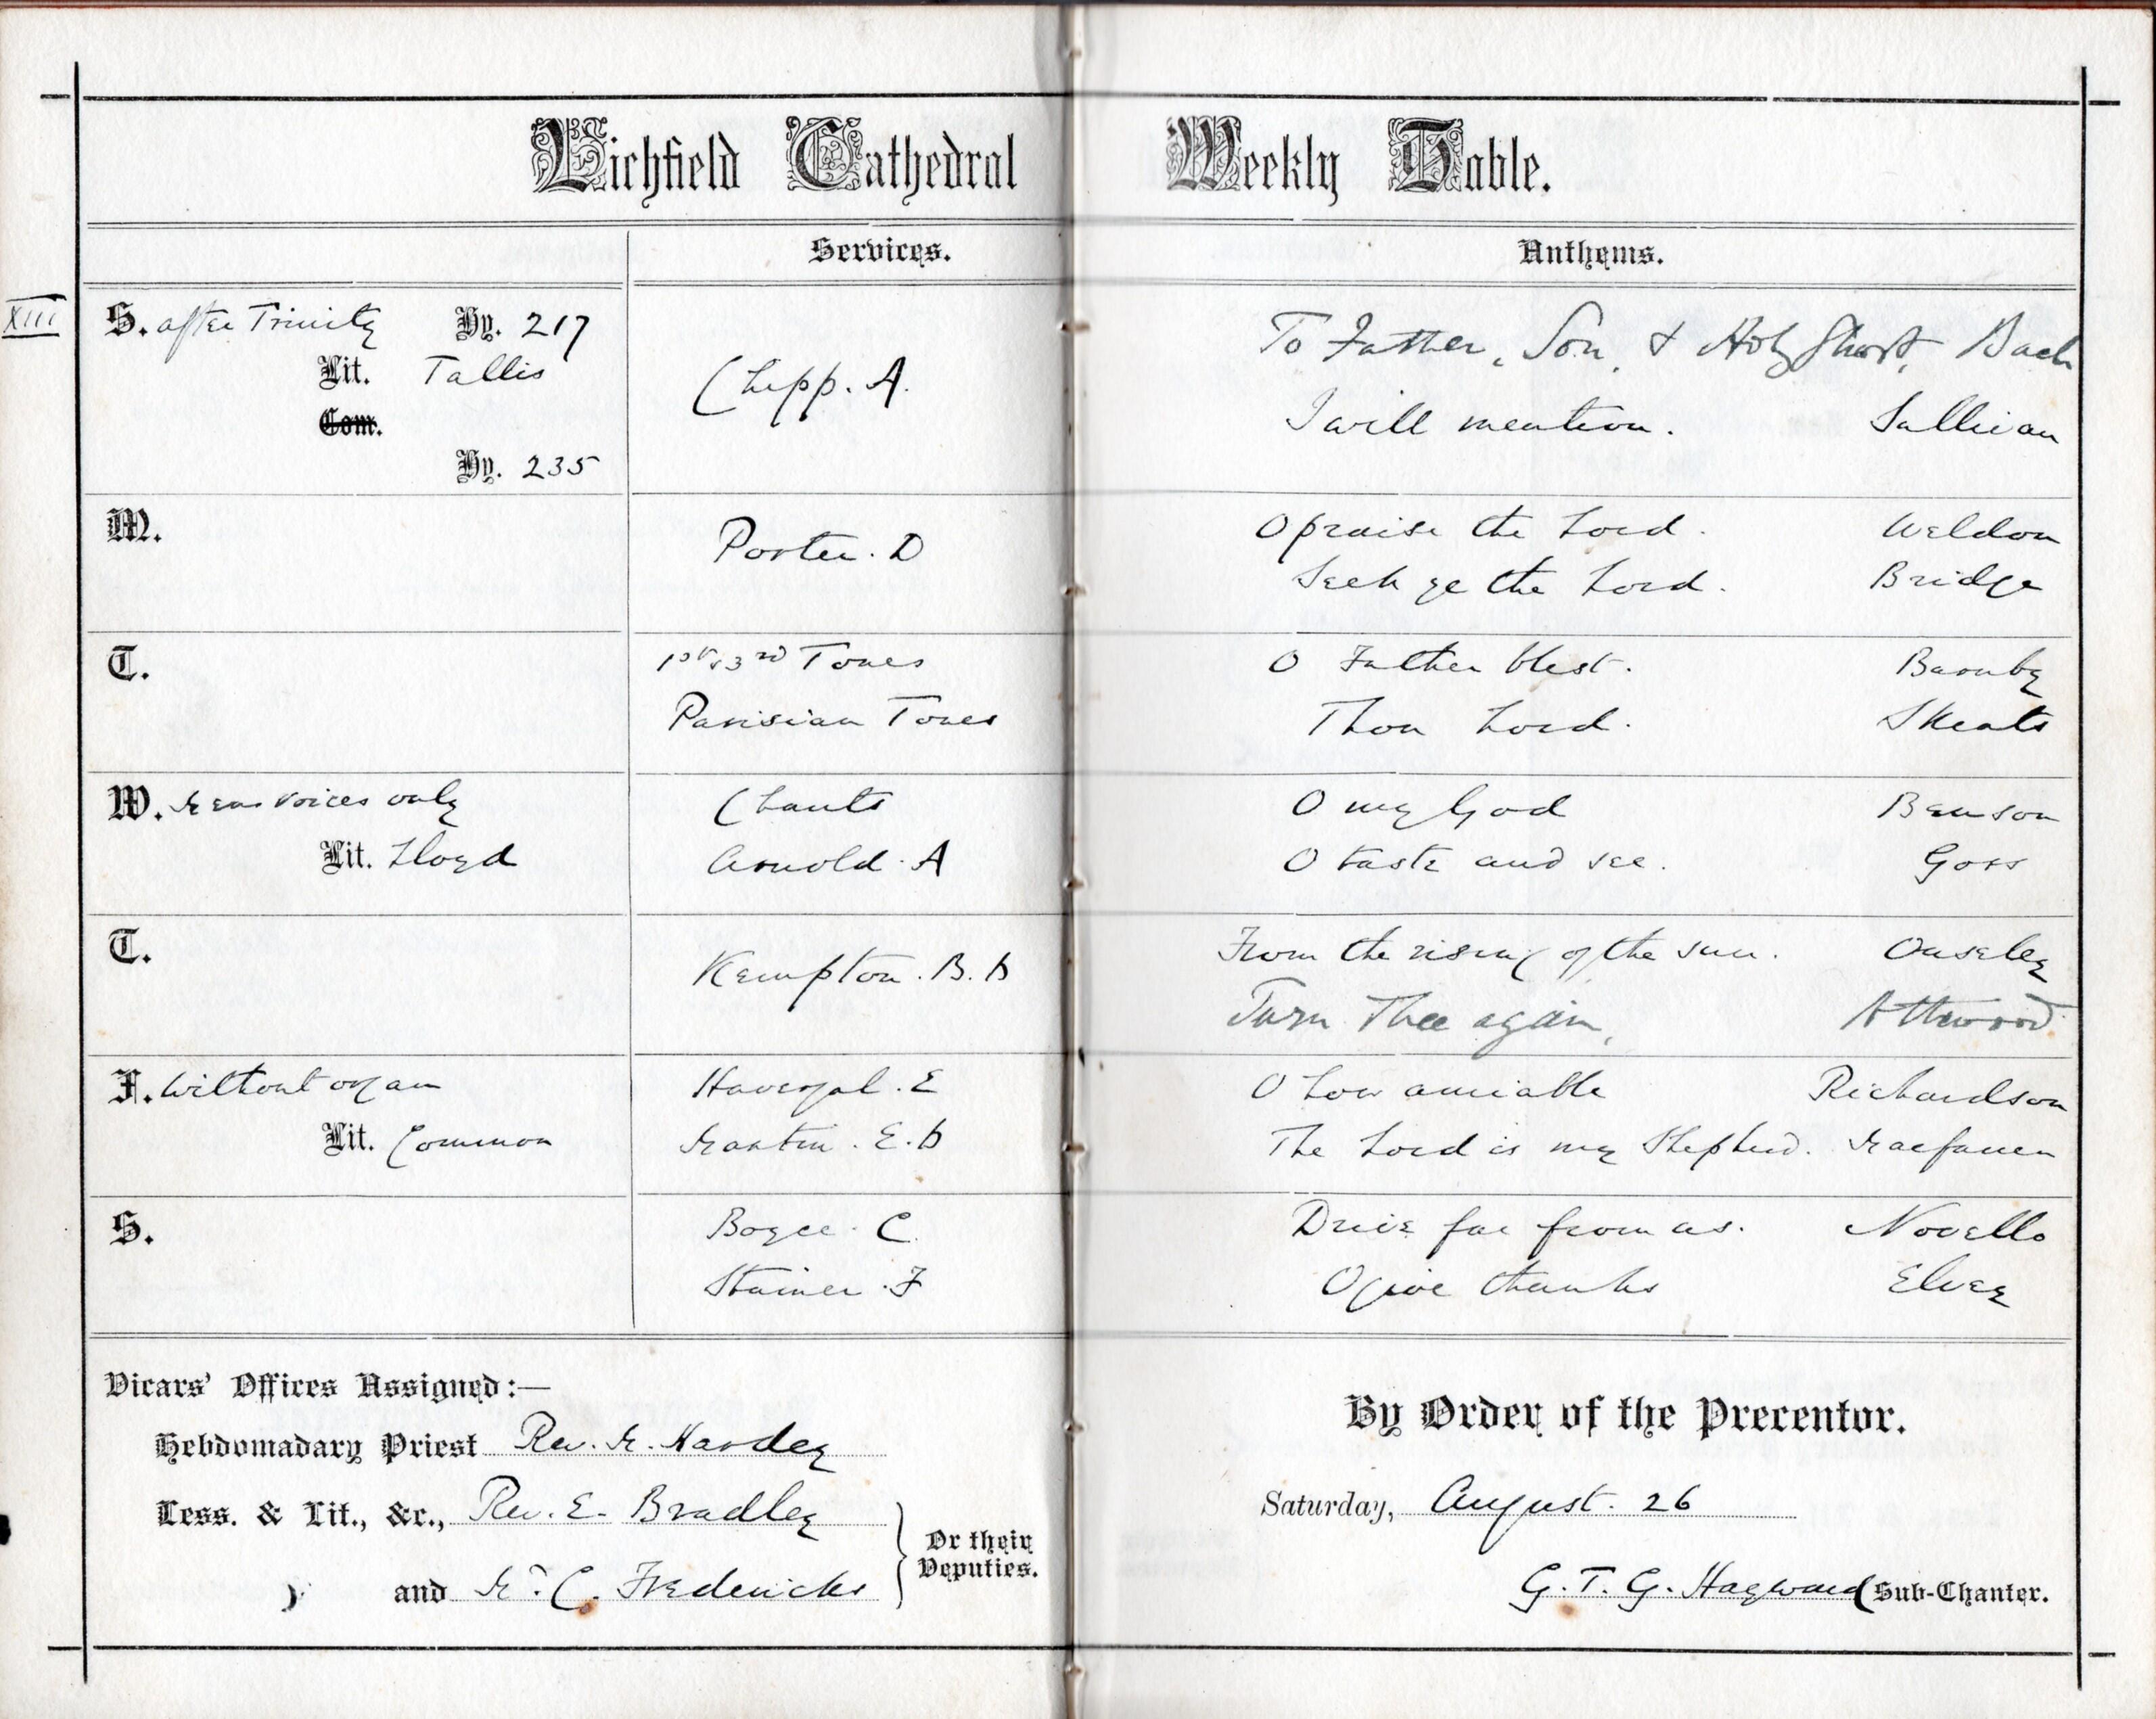 Services at Lichfield Cathedral for the week beginning 27 August 1893